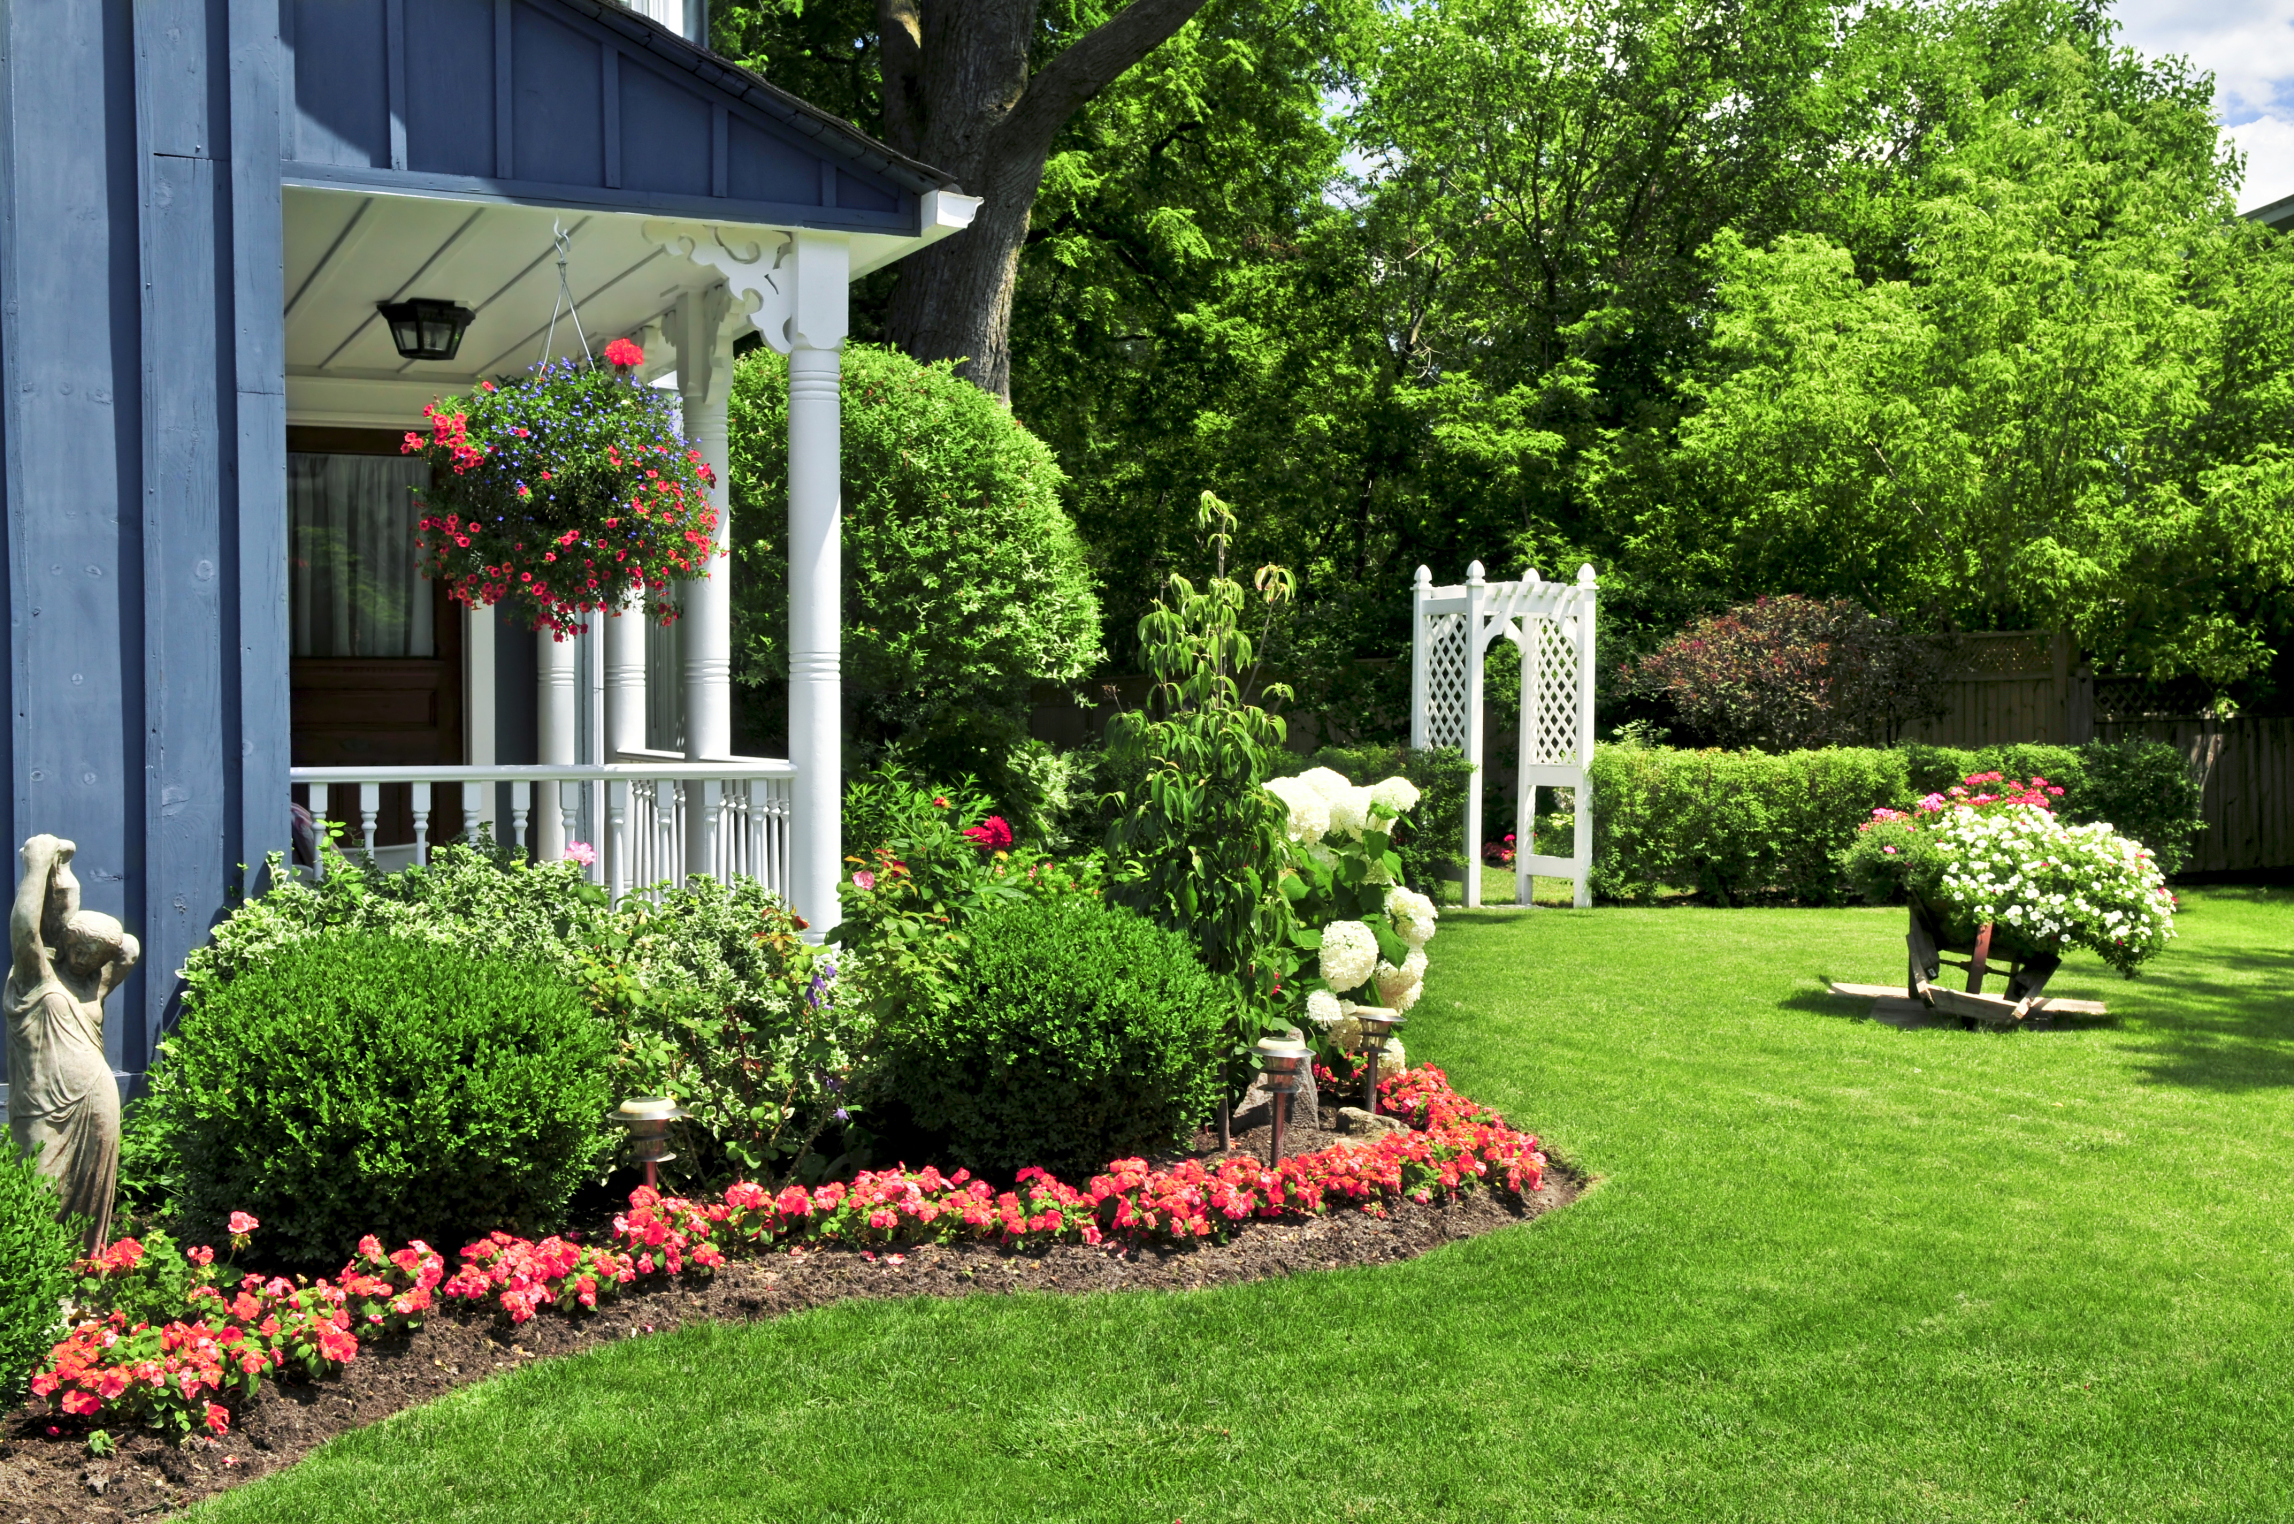 Making Your Garden More Accessible to Enjoy in Your Golden Years